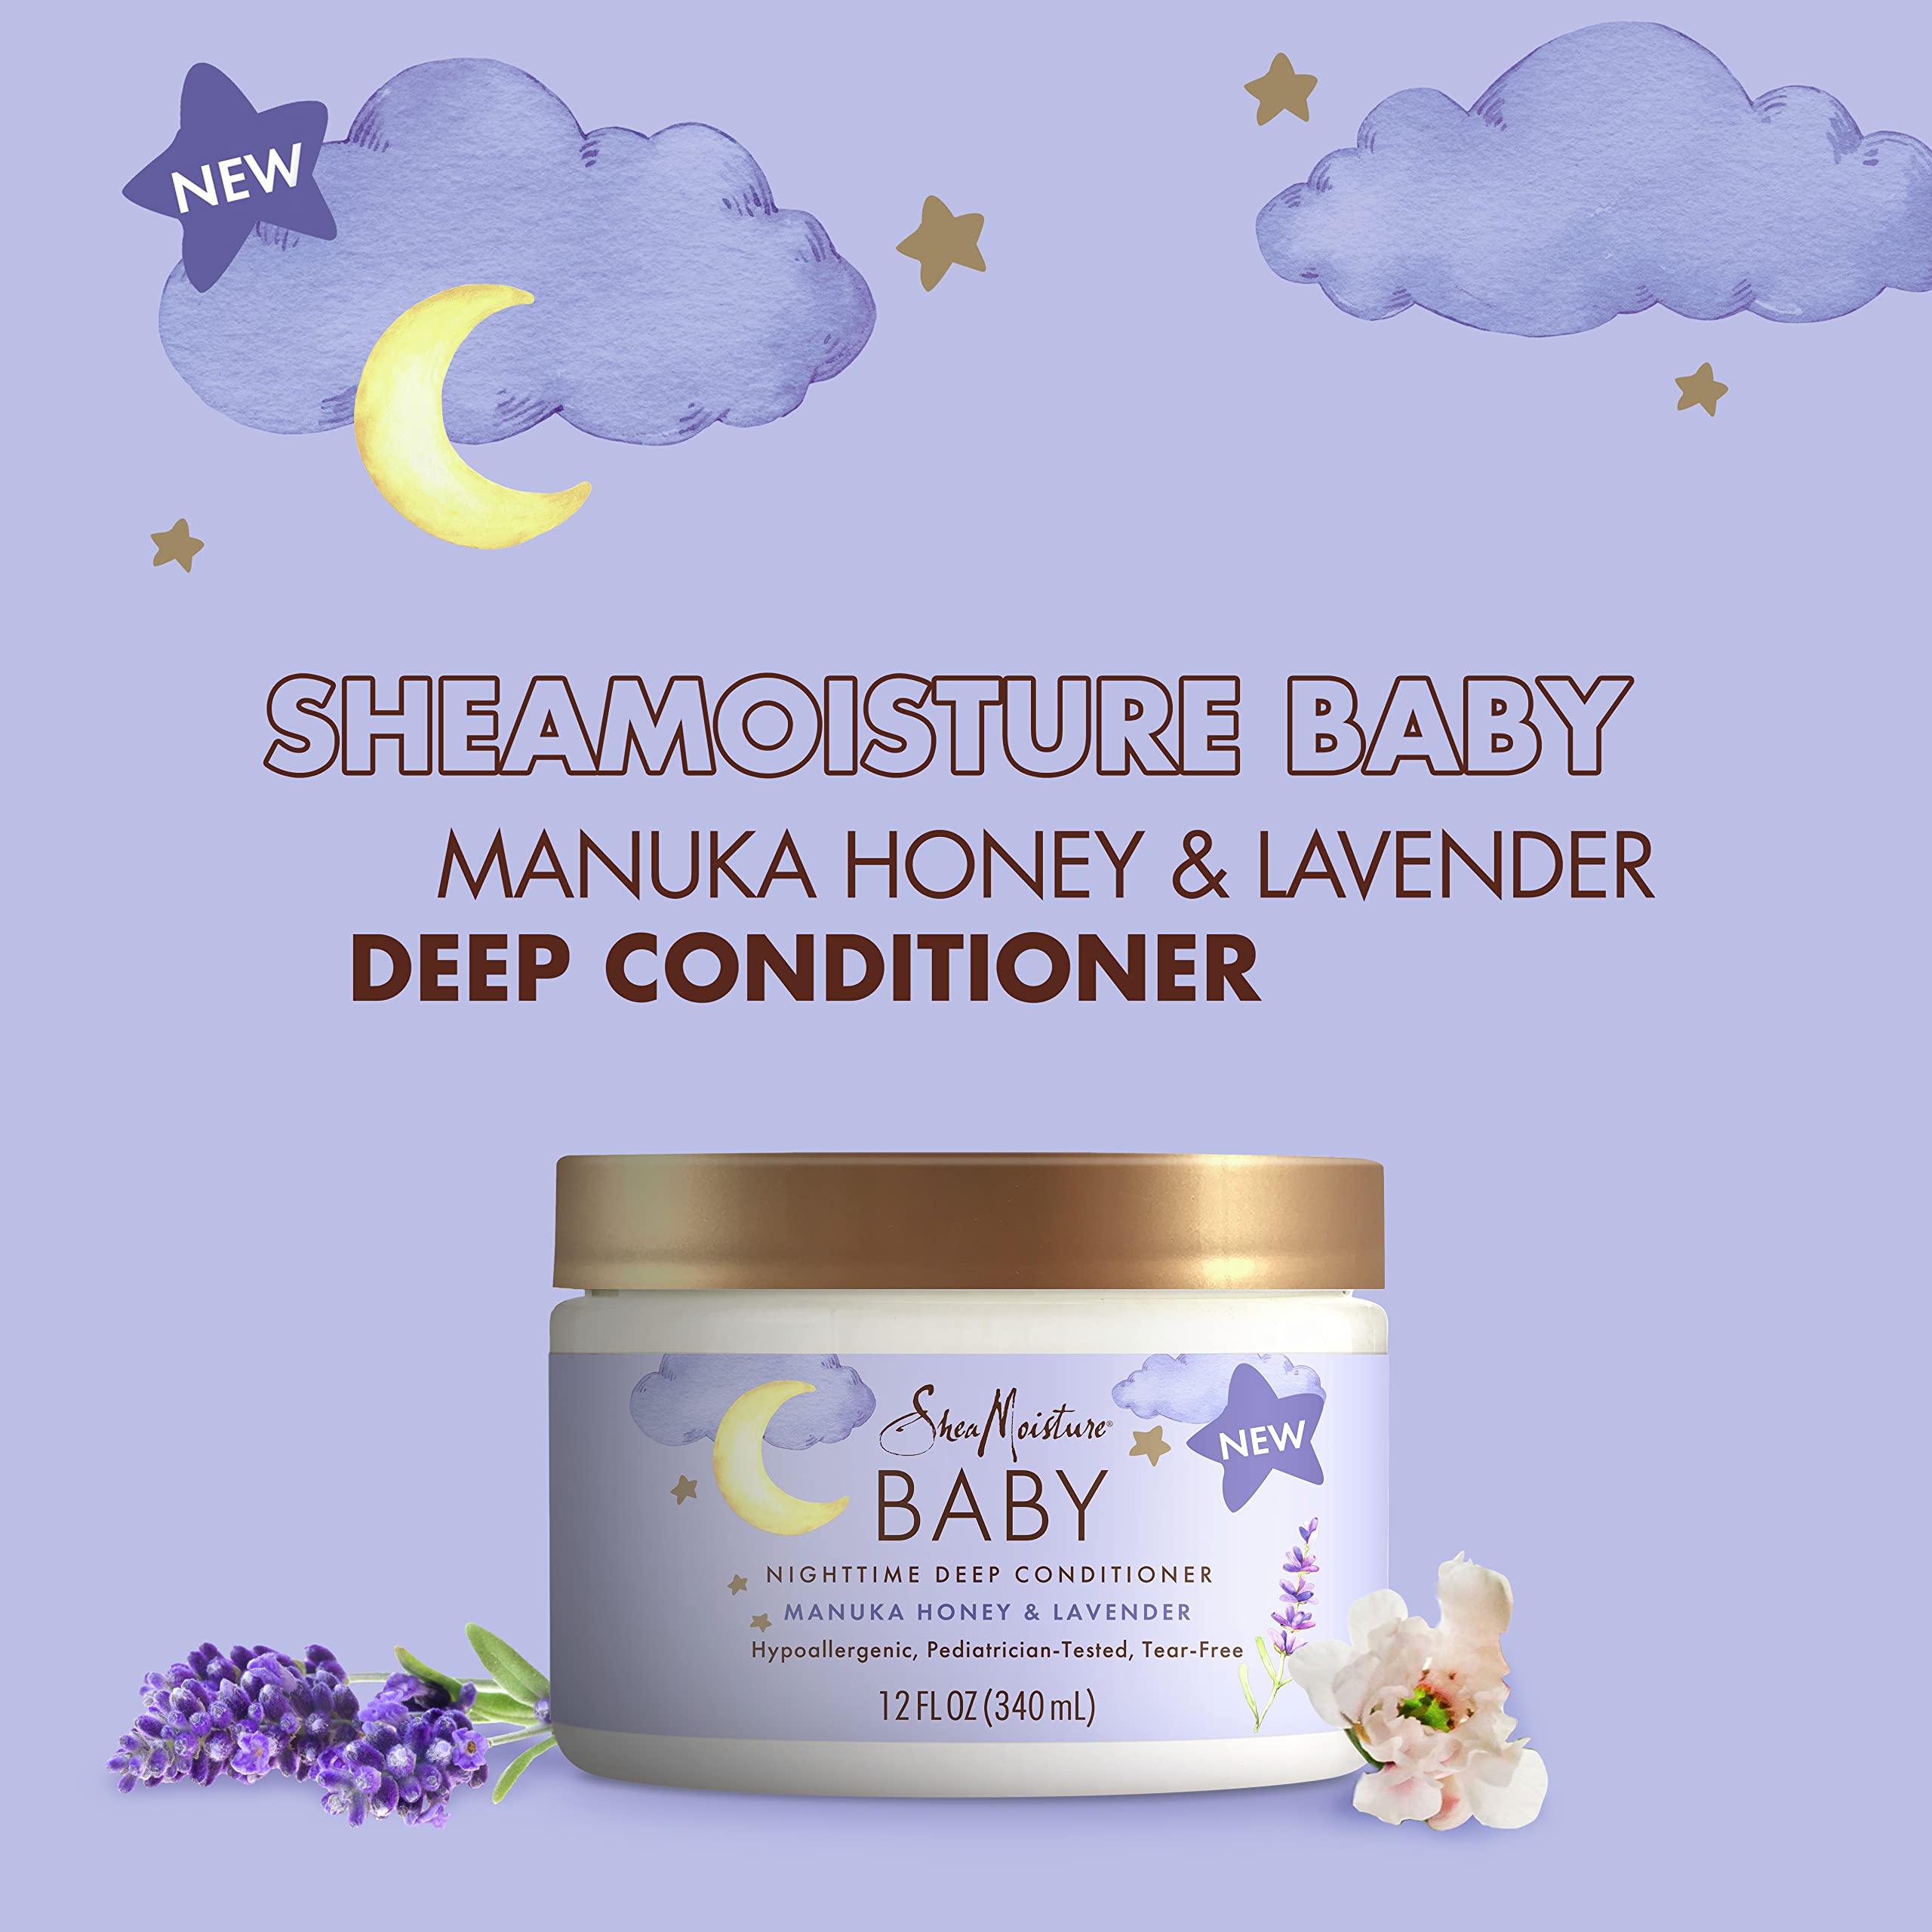 SheaMoisture Baby Deep Conditioner Manuka Honey & Lavender for Delicate Hair and Skin Nighttime Skin and Hair Care Regimen 12 oz